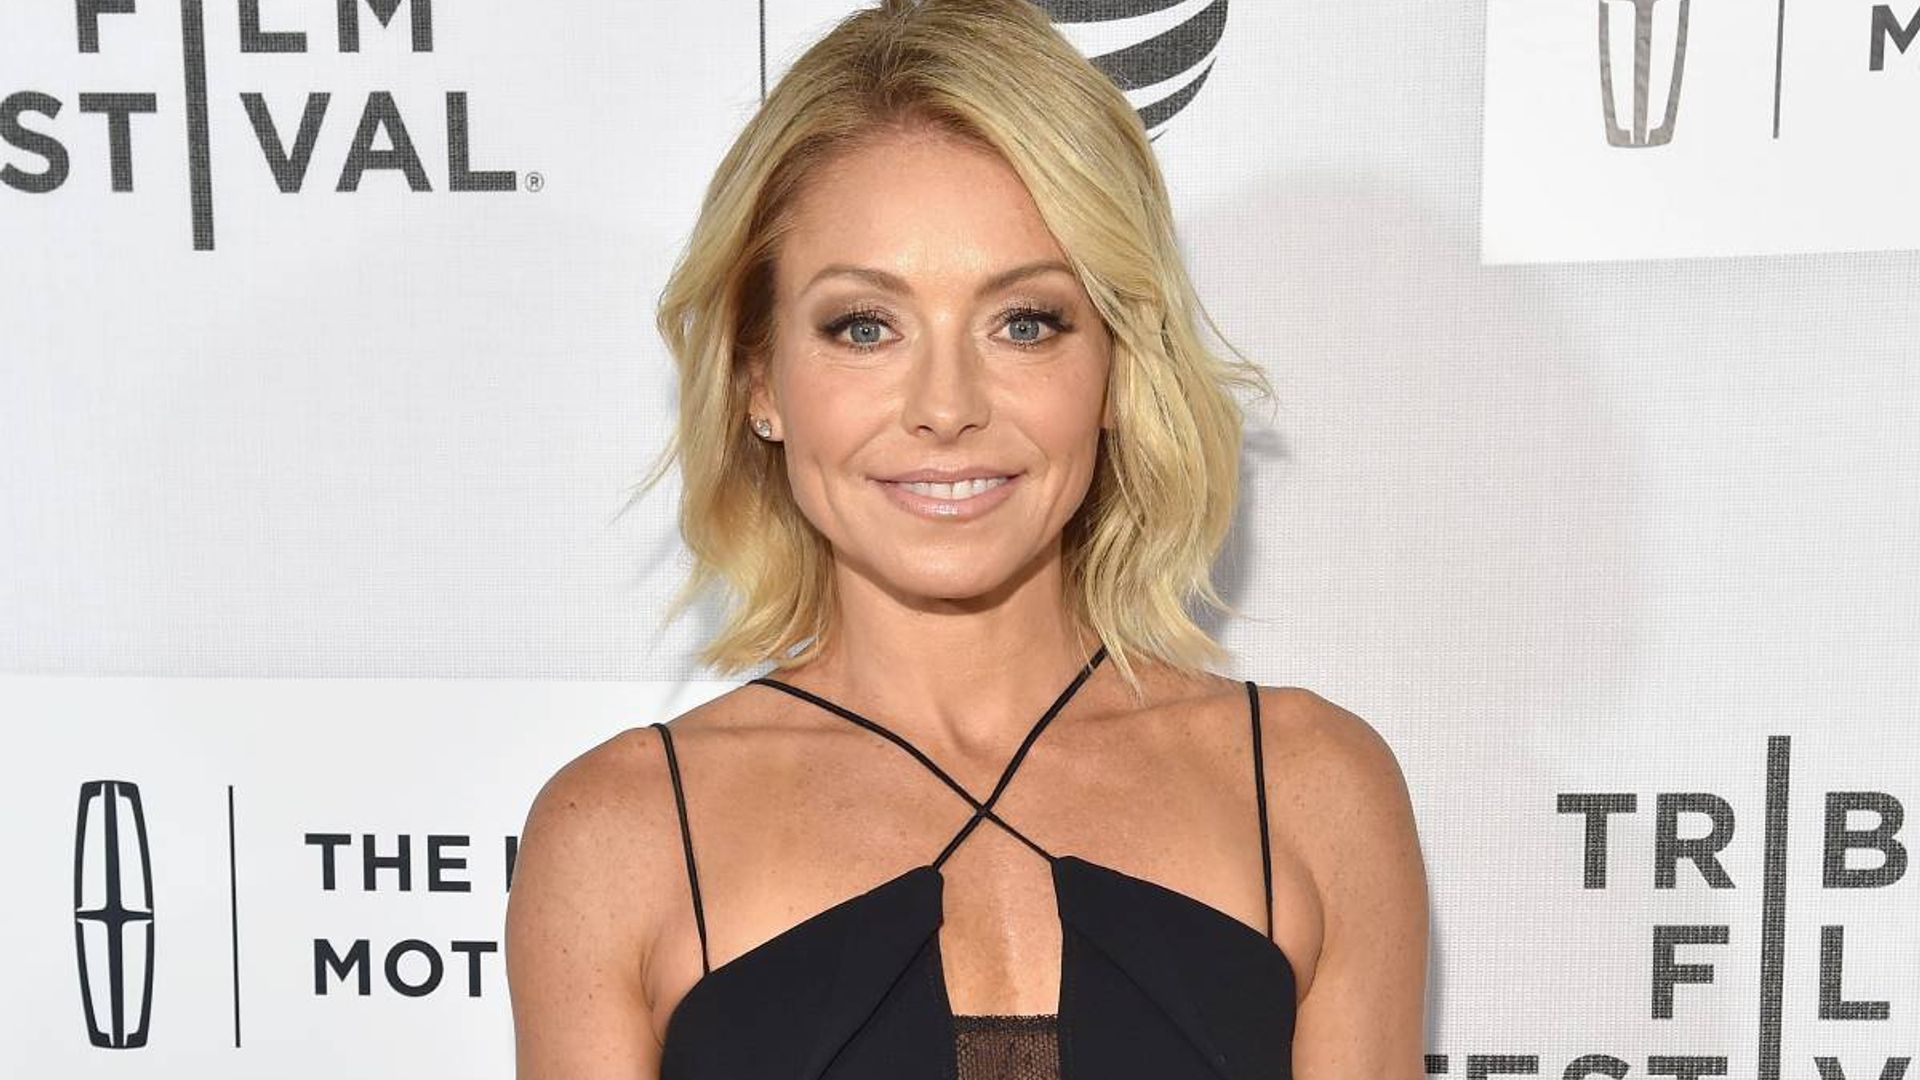 Kelly Ripa shares stormy beach photo - makes swimsuit confession